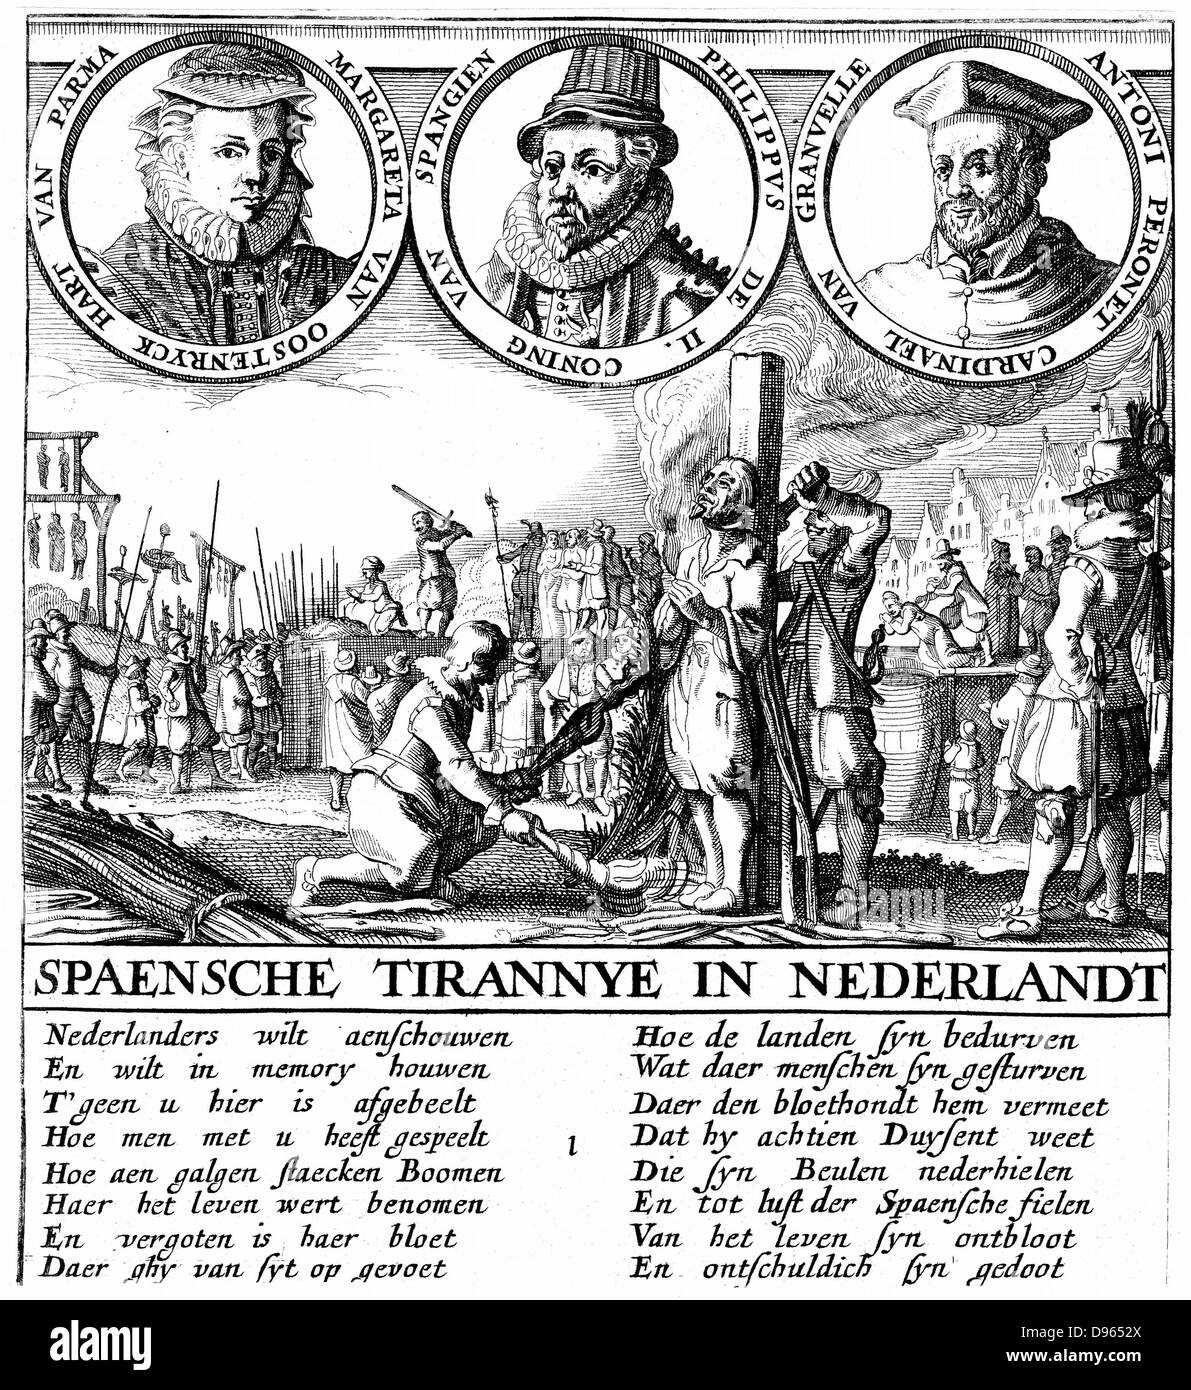 Spanish tyranny in Nertherlands. Portraits are Margaret of Parma, Spanish Regent in Netherlands (1559-67), Philip II of Spain, and Antoine Granvell, Spanish diplomat and prelate. Main picture, execution of Huguenots. Man in foreground being treated 'mercifully' by being garotted before flames reach him. Copperplate engraving Stock Photo